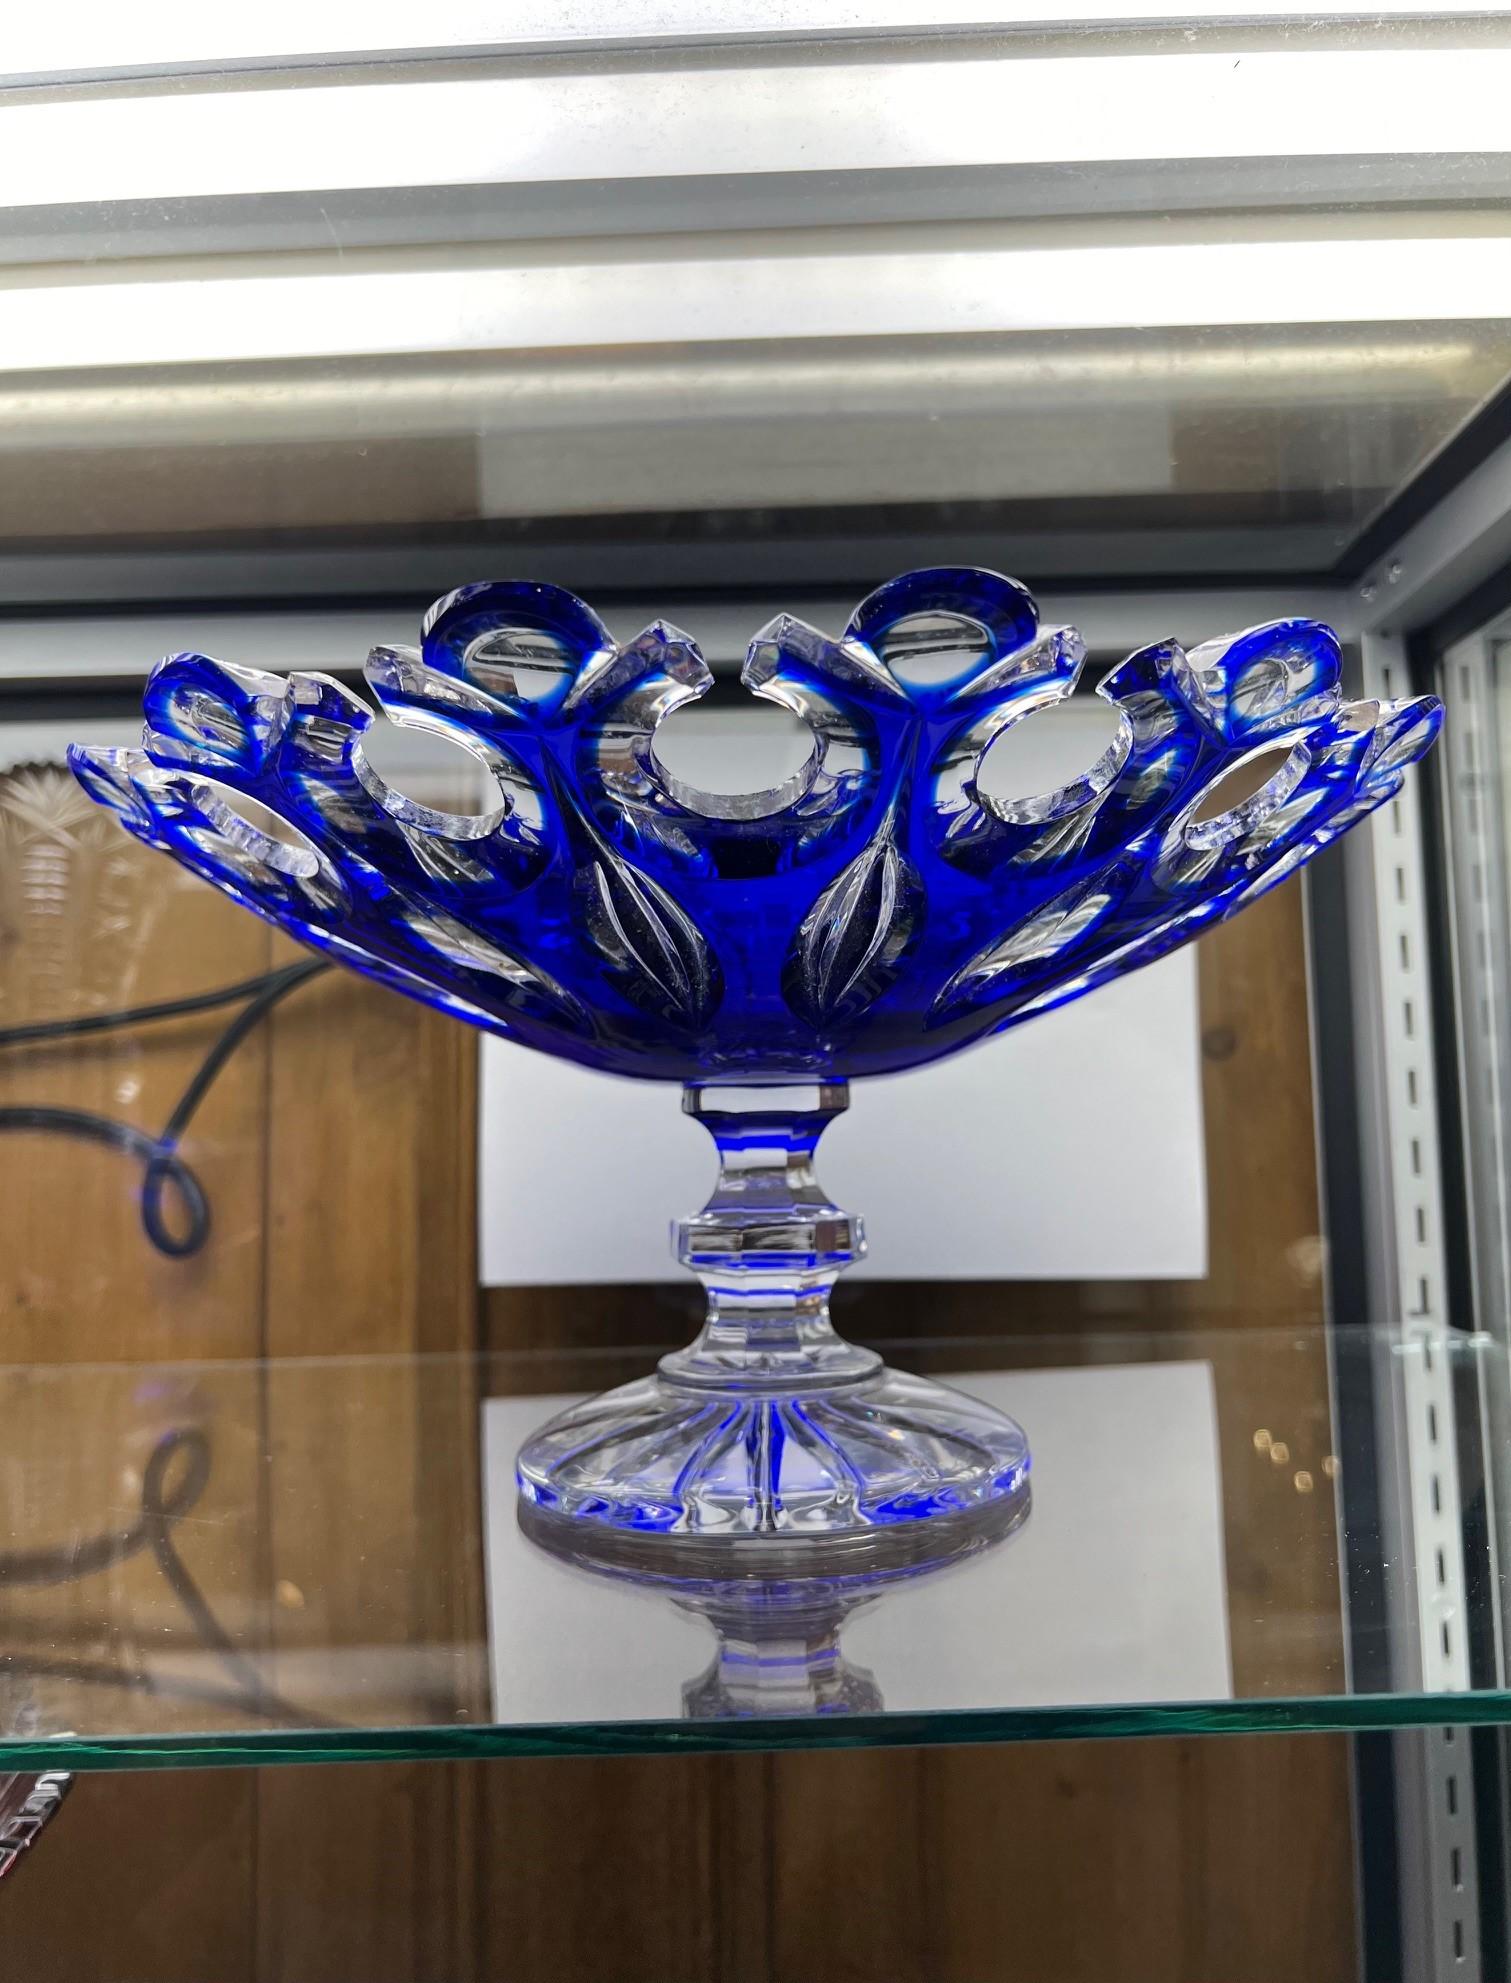 Stunning hand cut lead crystal low bowl created as a work of art by the hands of the finest Czech glass workers. The Caesar Crystal Company in the Czech Republic has been selling hand cut lead crystal pieces since 1861 and is known as one of the